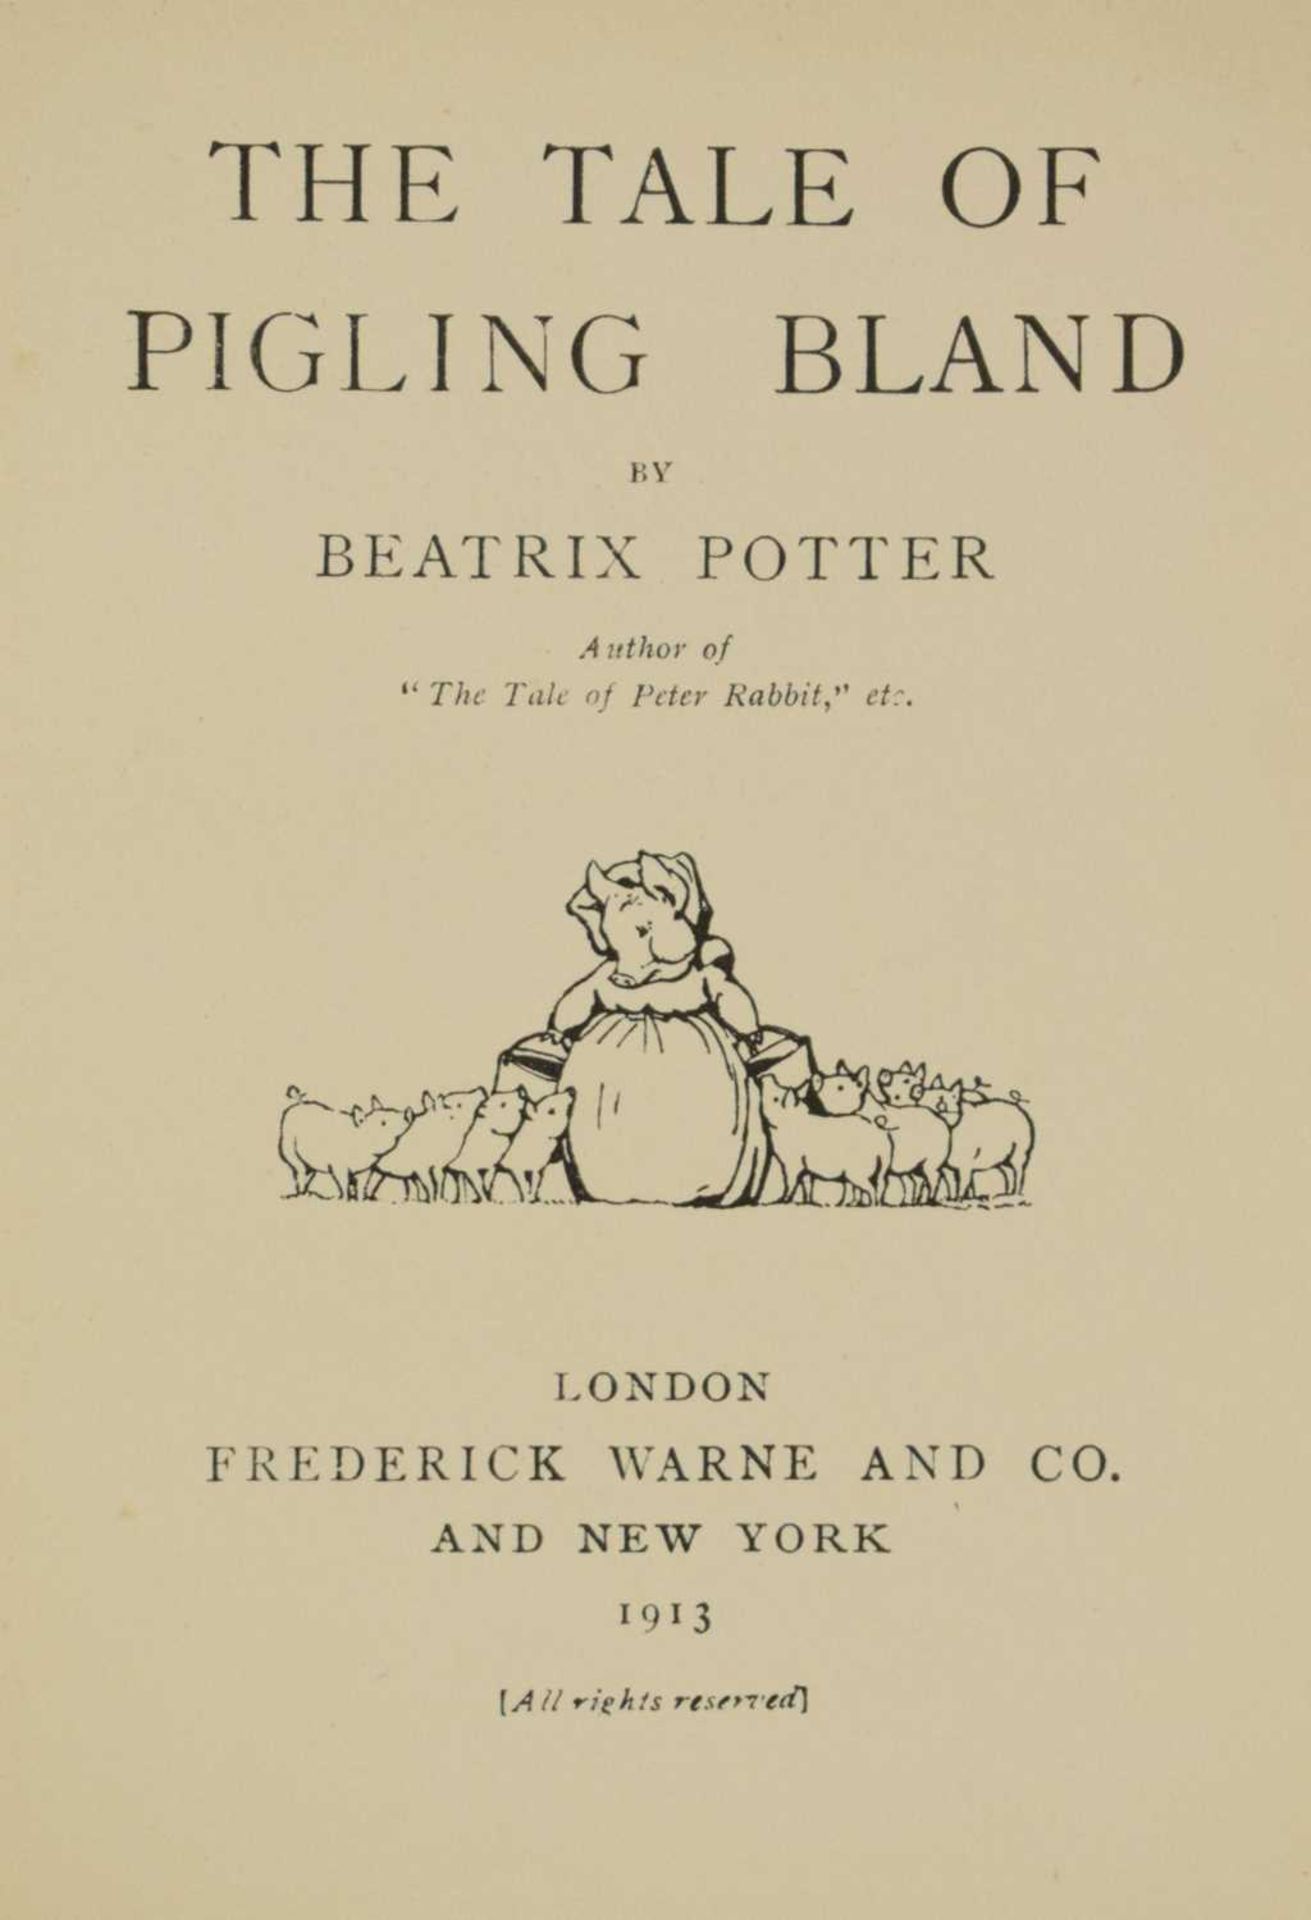 Potter, Beatrix - 'The Tale of Pigling Bland' - First edition 1913 - Image 8 of 19